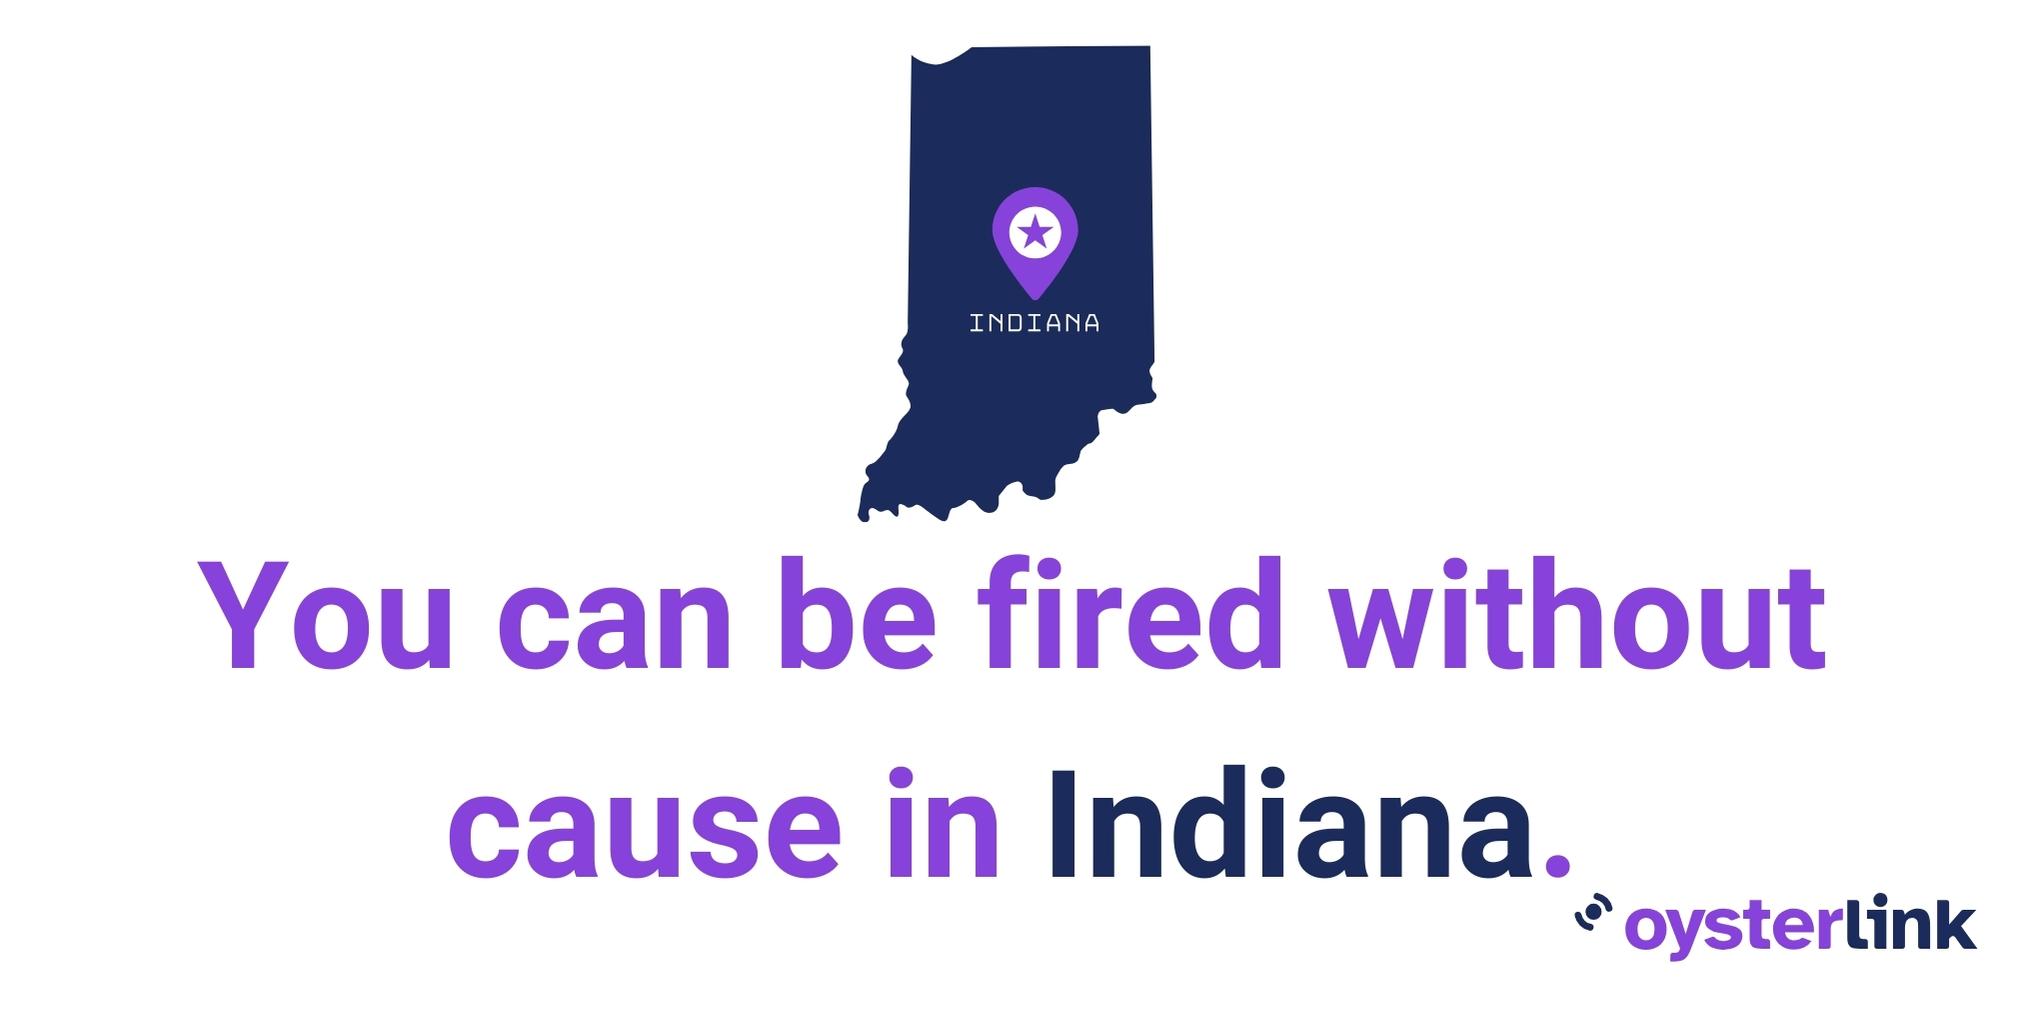 You can be fired without cause in Indiana